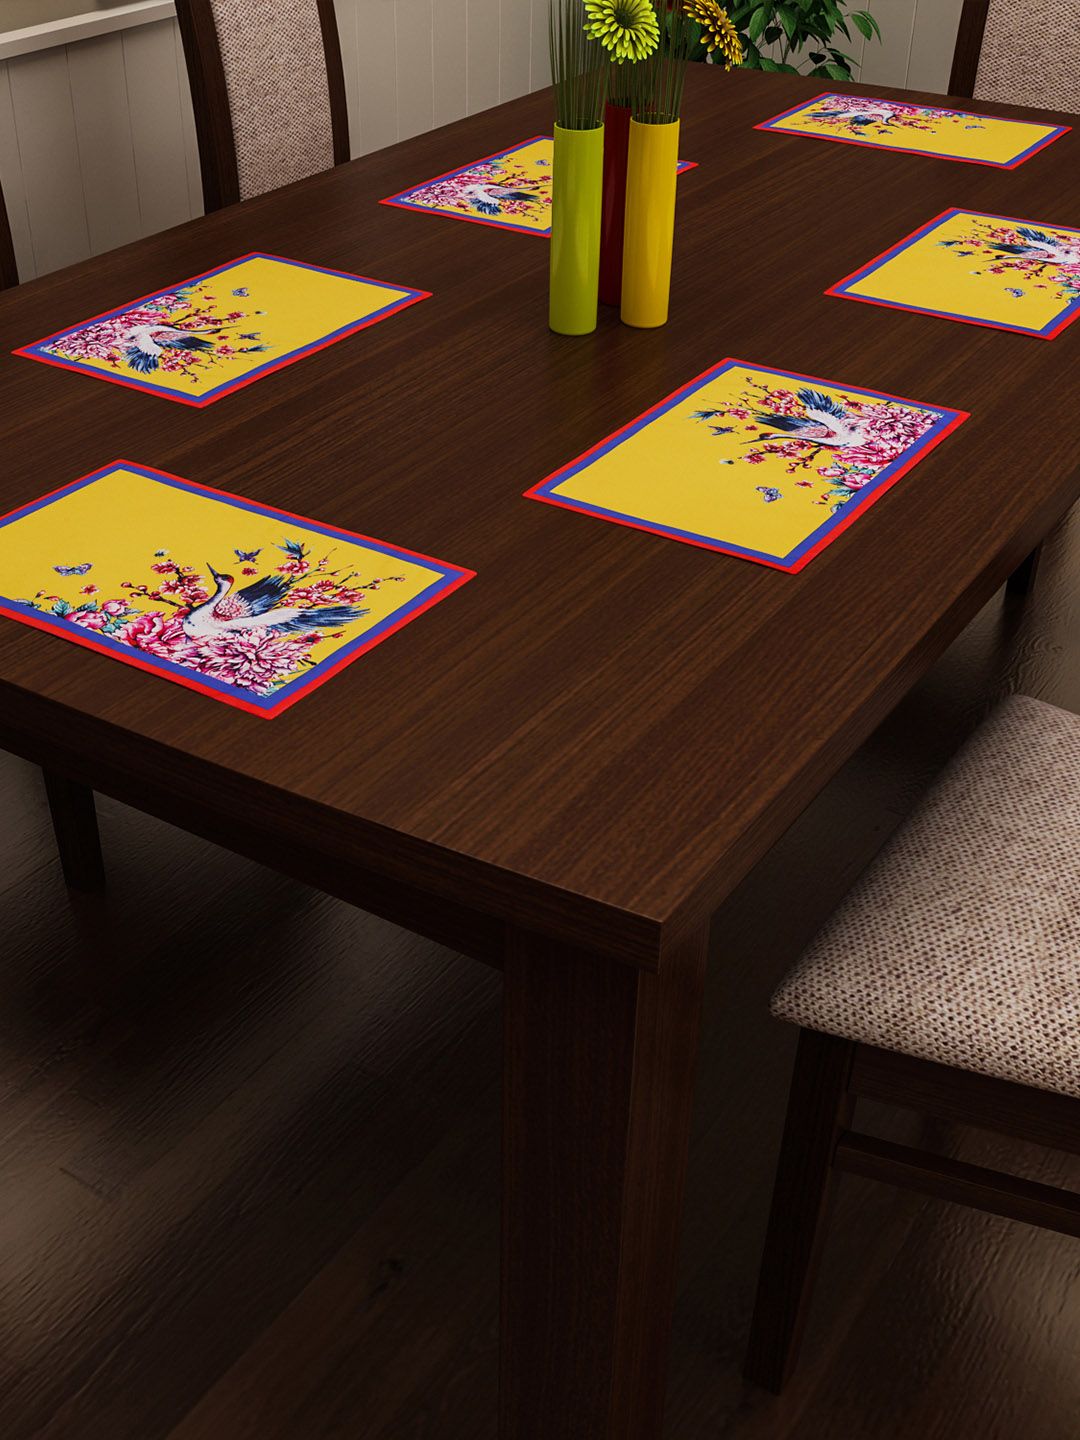 SEJ by Nisha Gupta Set of 6 Mustard & Pink Printed Table Placemats Price in India